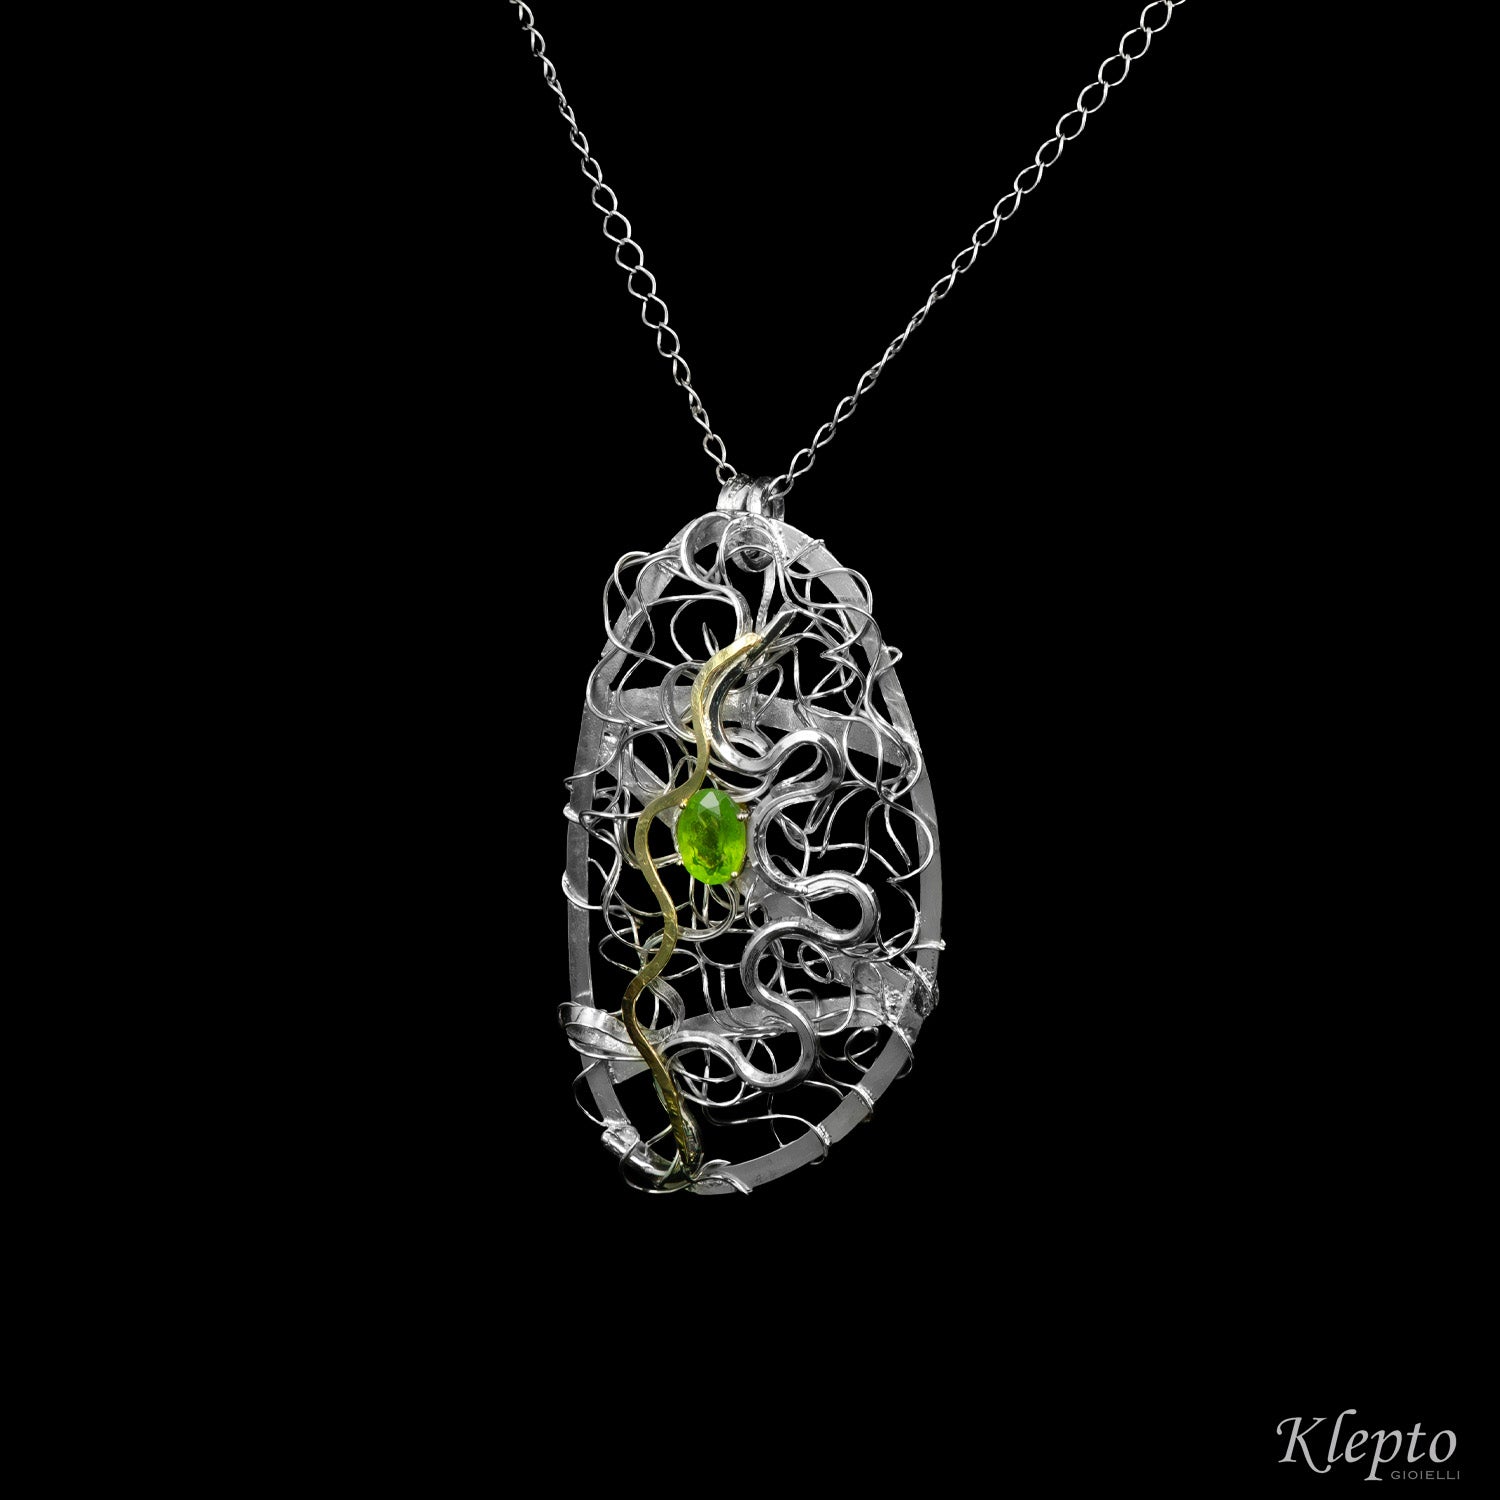 Pendant in Silnova® Silver wire with Peridot and yellow gold